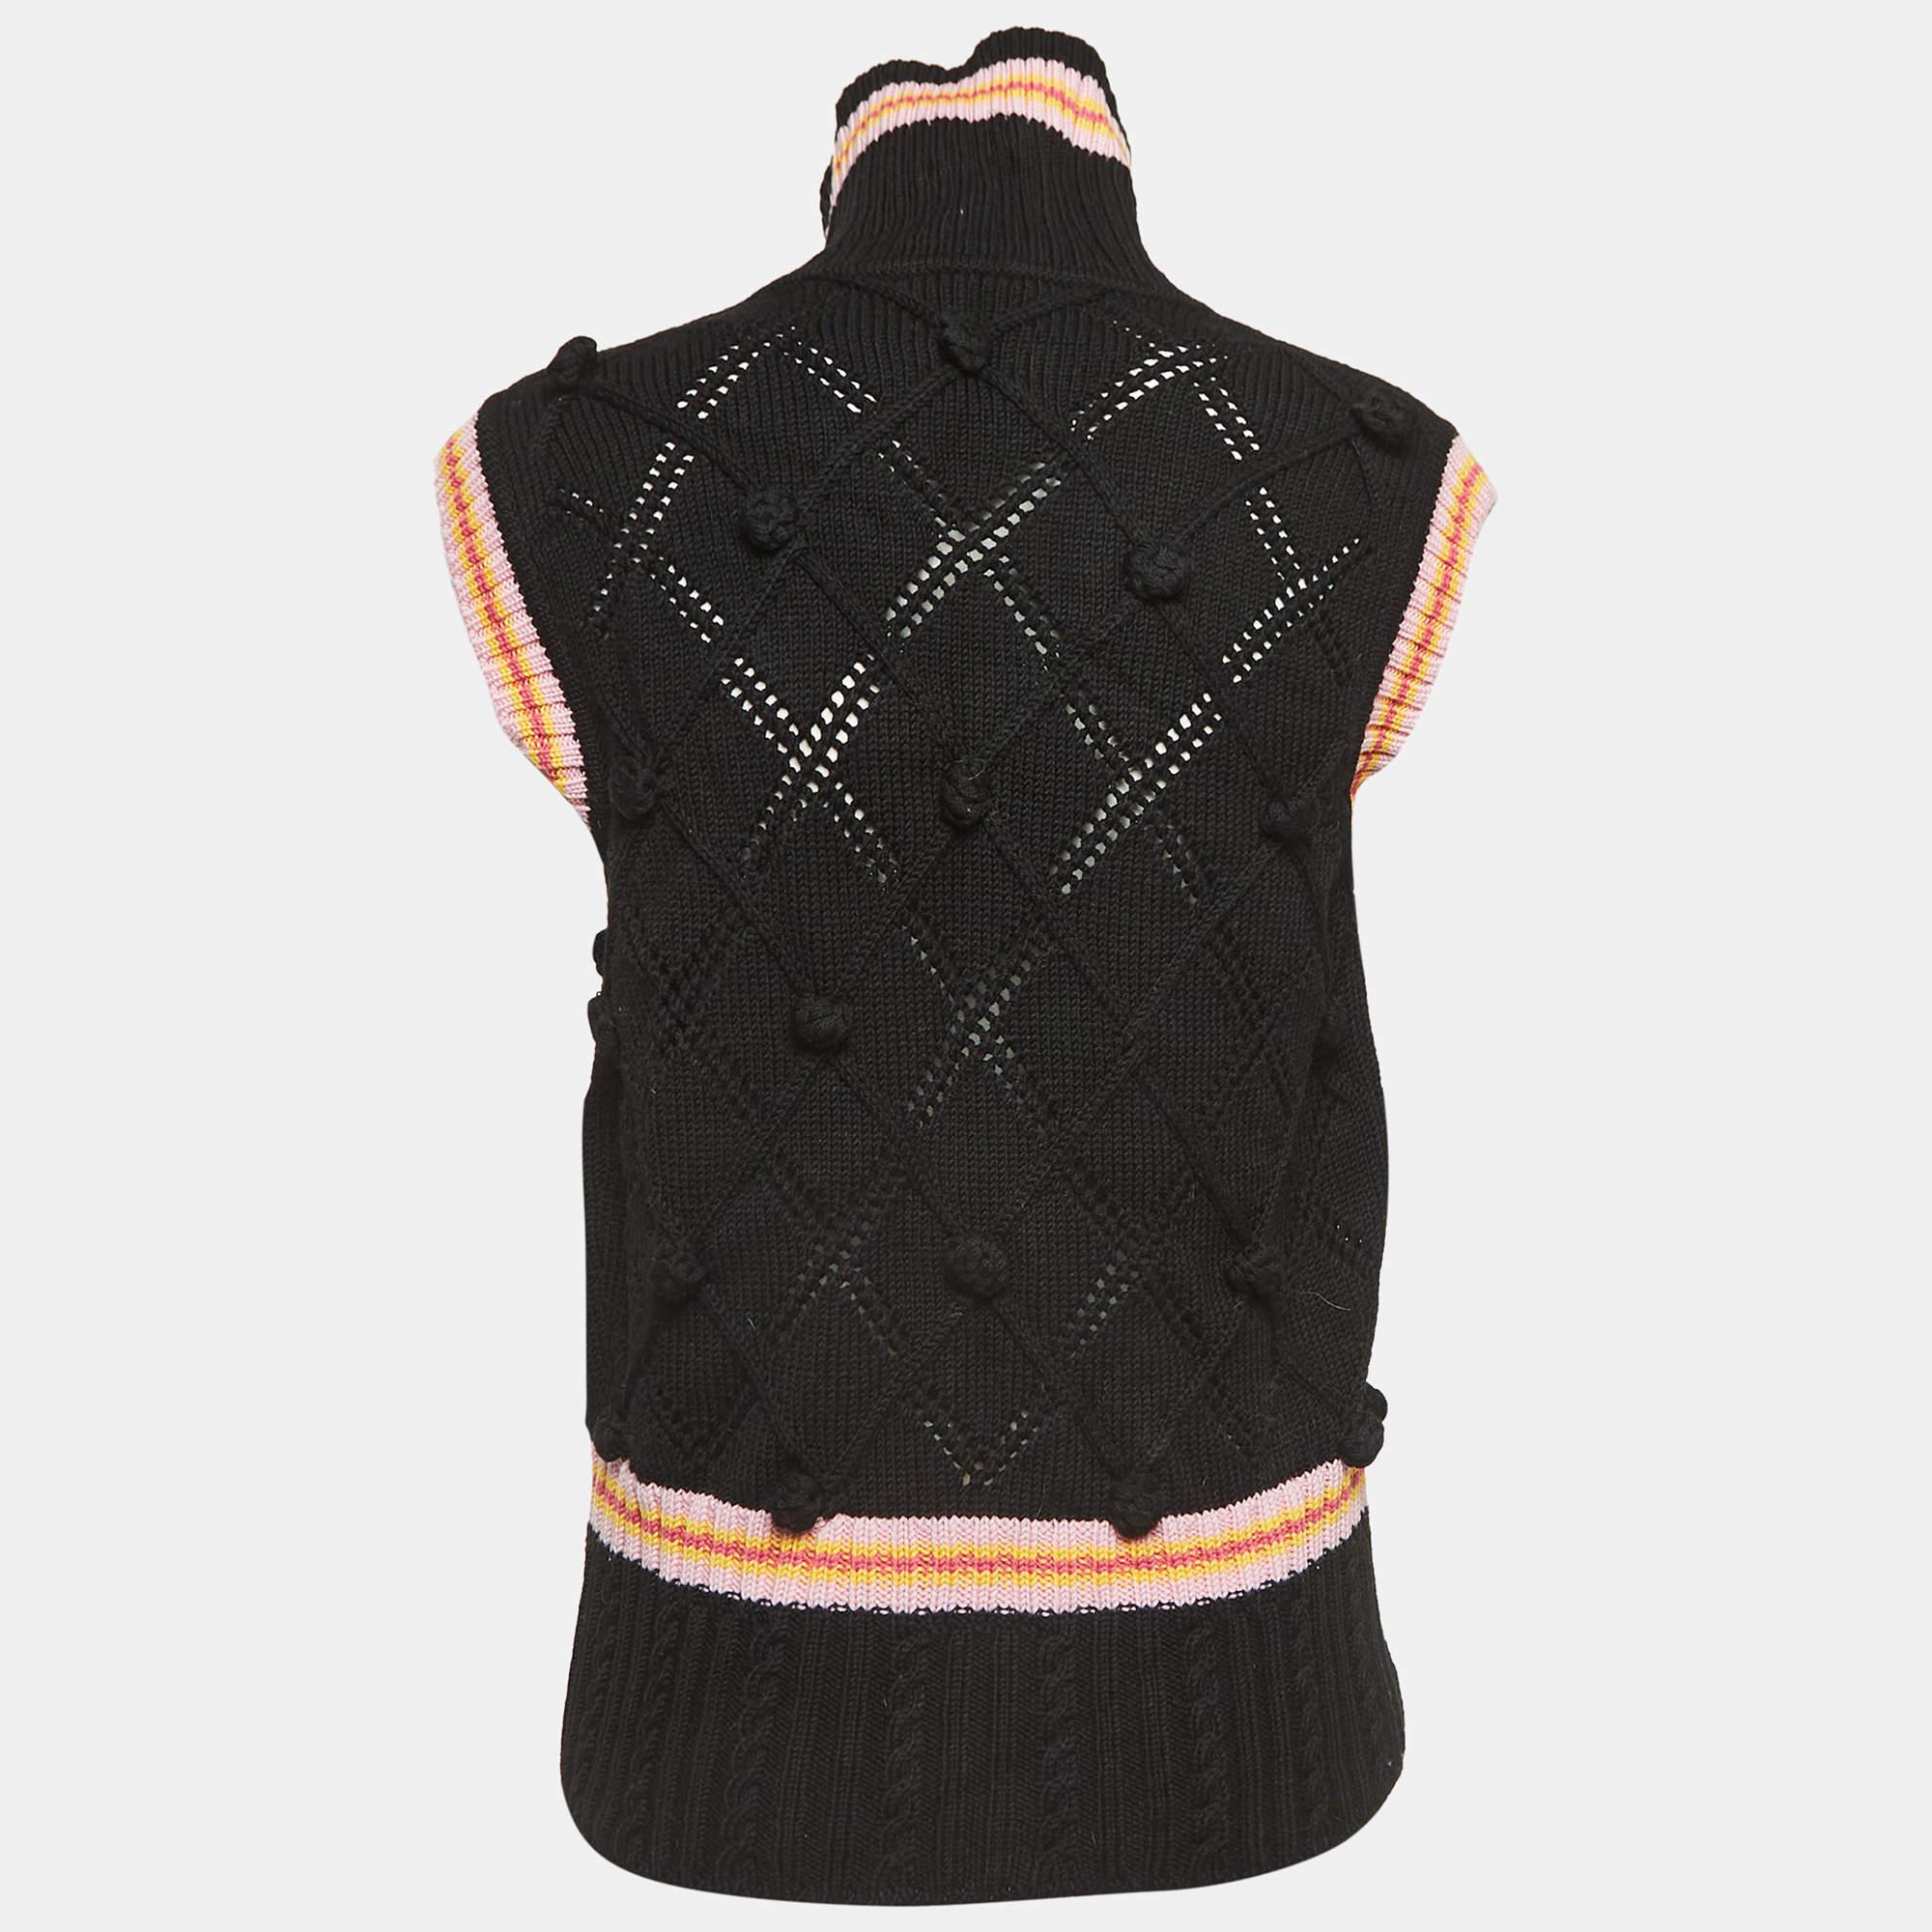 This vest by Christian Dior Boutique is aimed to provide comfortable luxury through clothing. Made to last, the knitted vest for women features a front zip closure.

